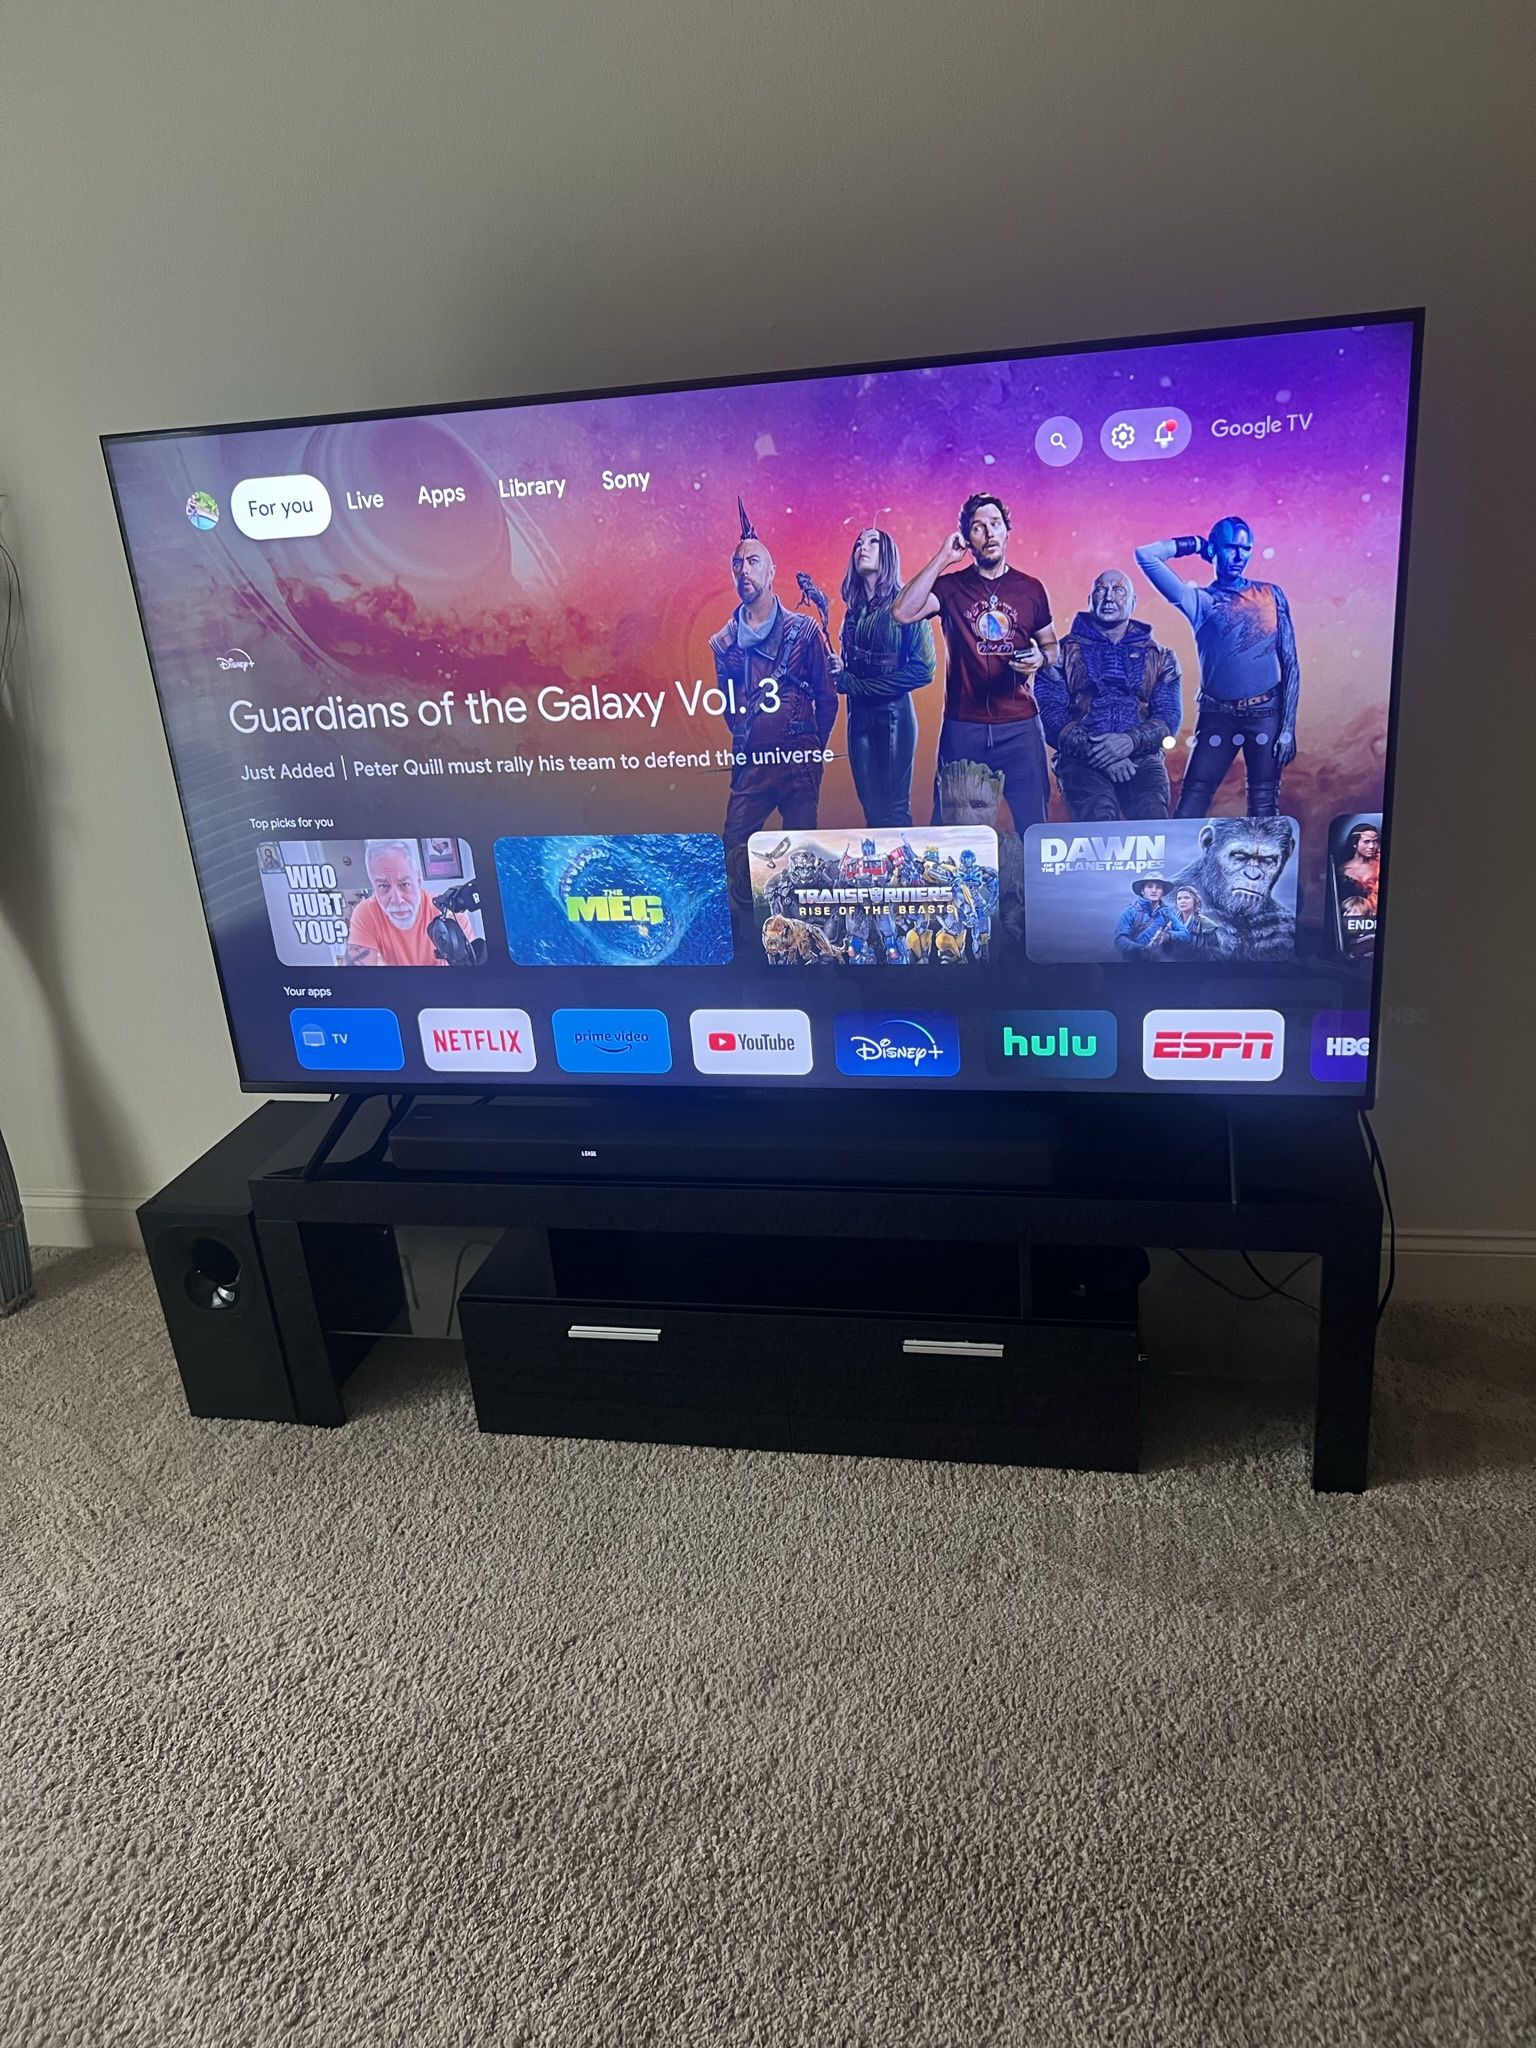 75” Sony TV  With Surrounding Sound System 